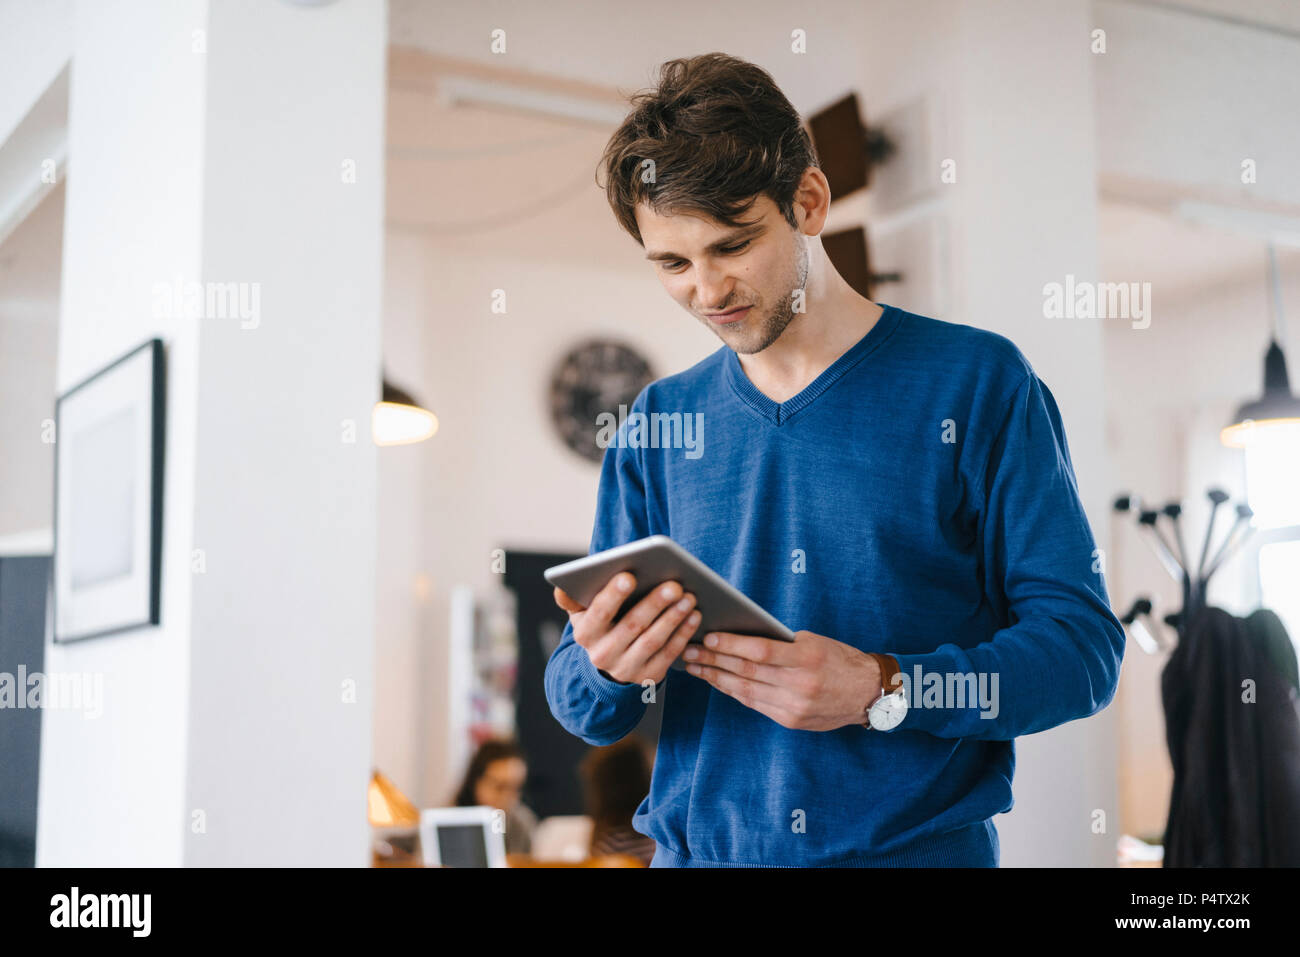 Man standing in a cafe looking at tablet Stock Photo